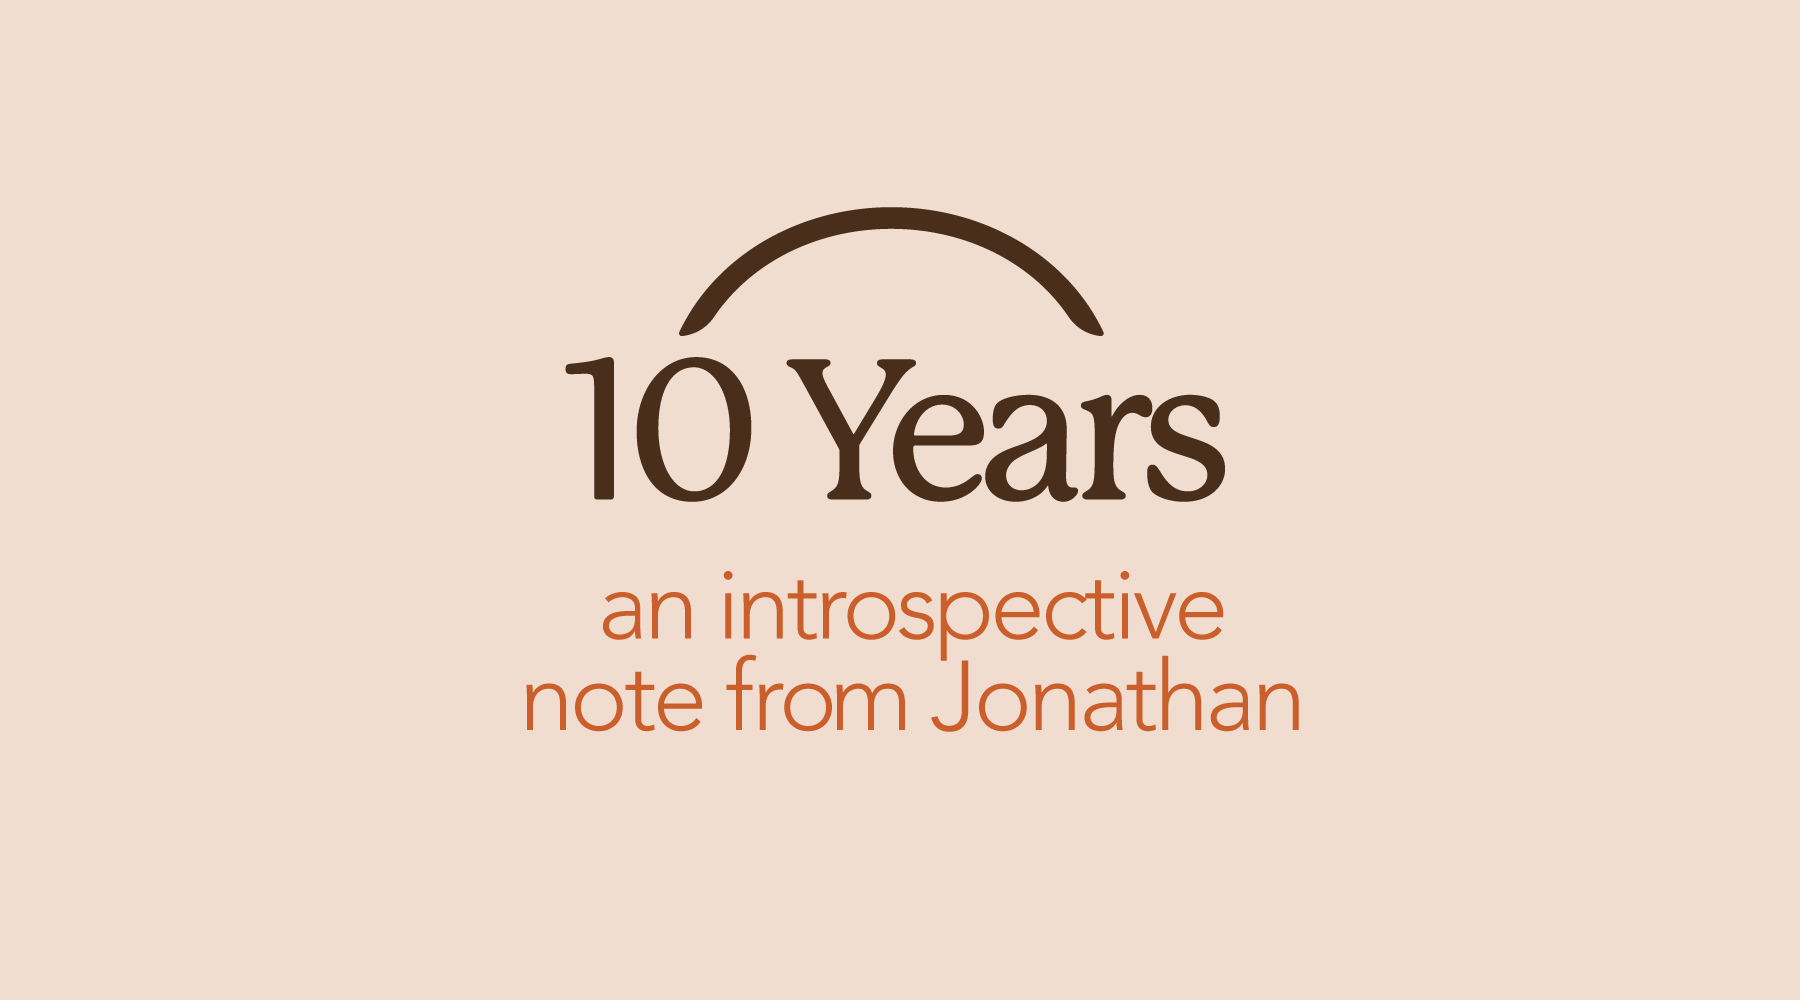 Beige graphic with brown and orange text saying 10 years an introspective note from Jonathan